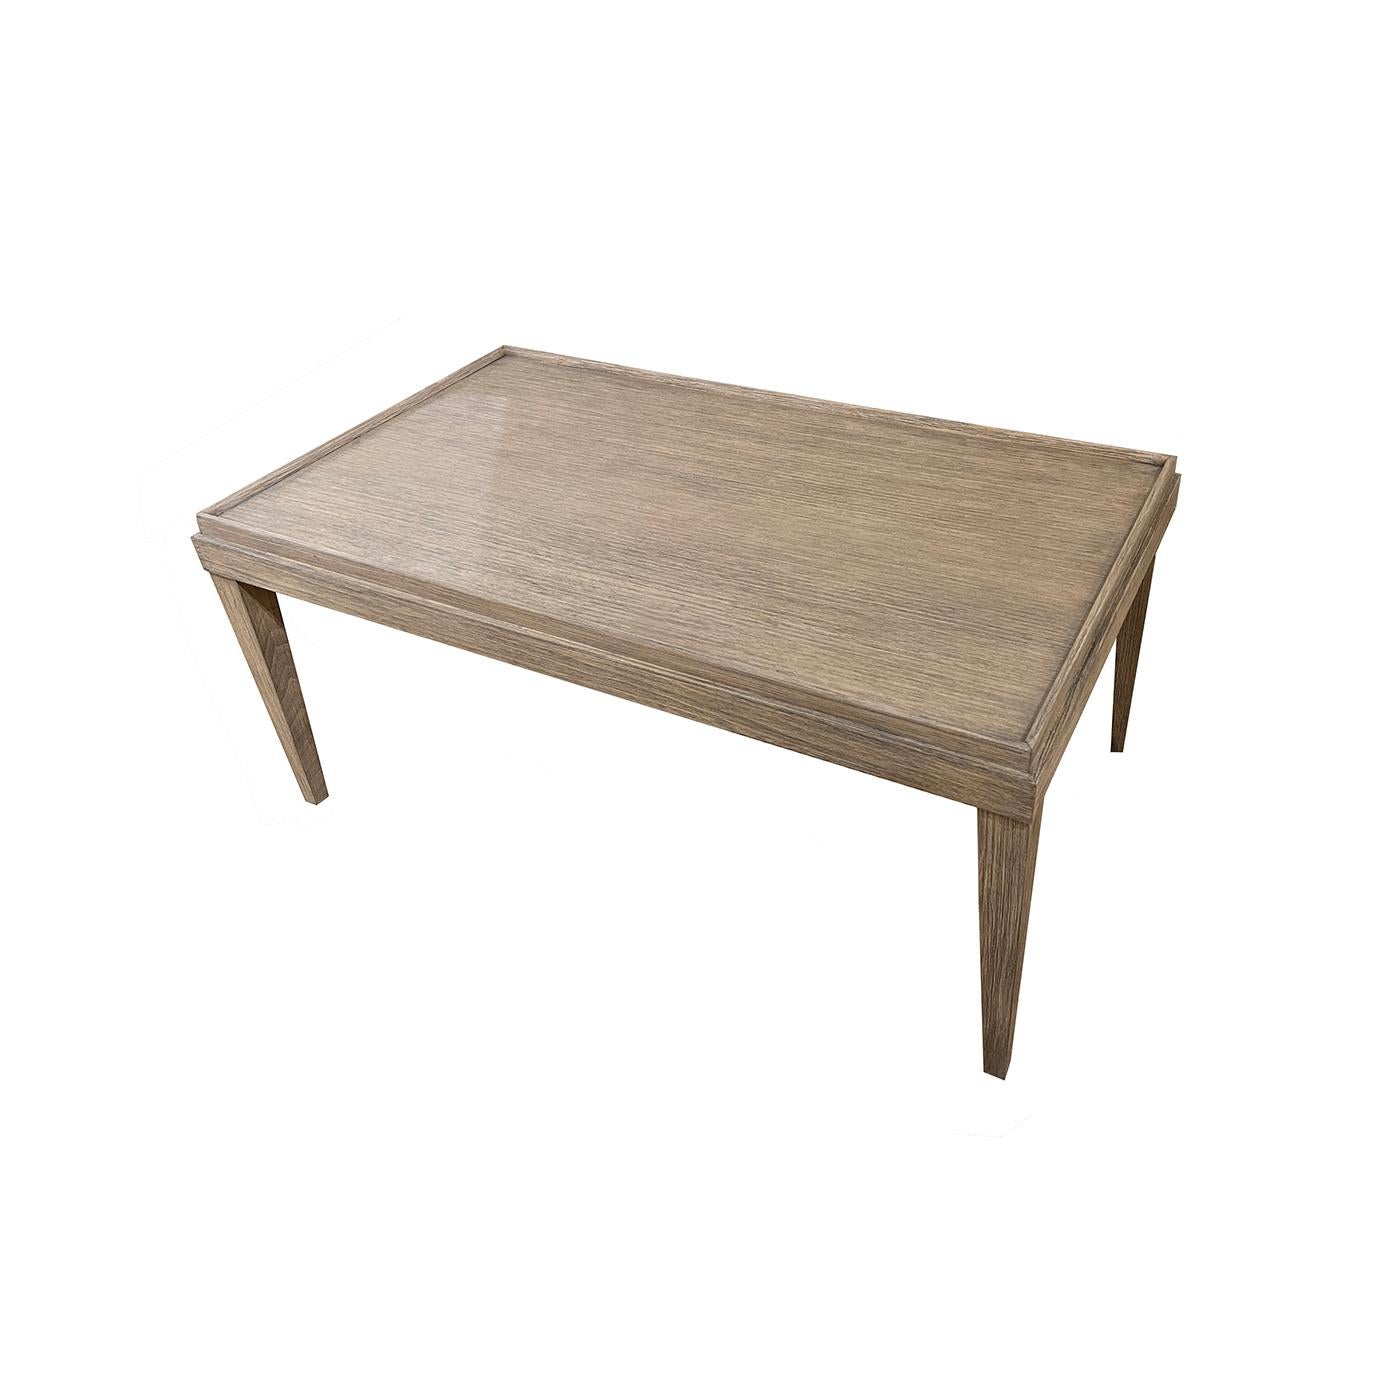 Vietnamese Classic Rustic Coffee Table, Greyed For Sale